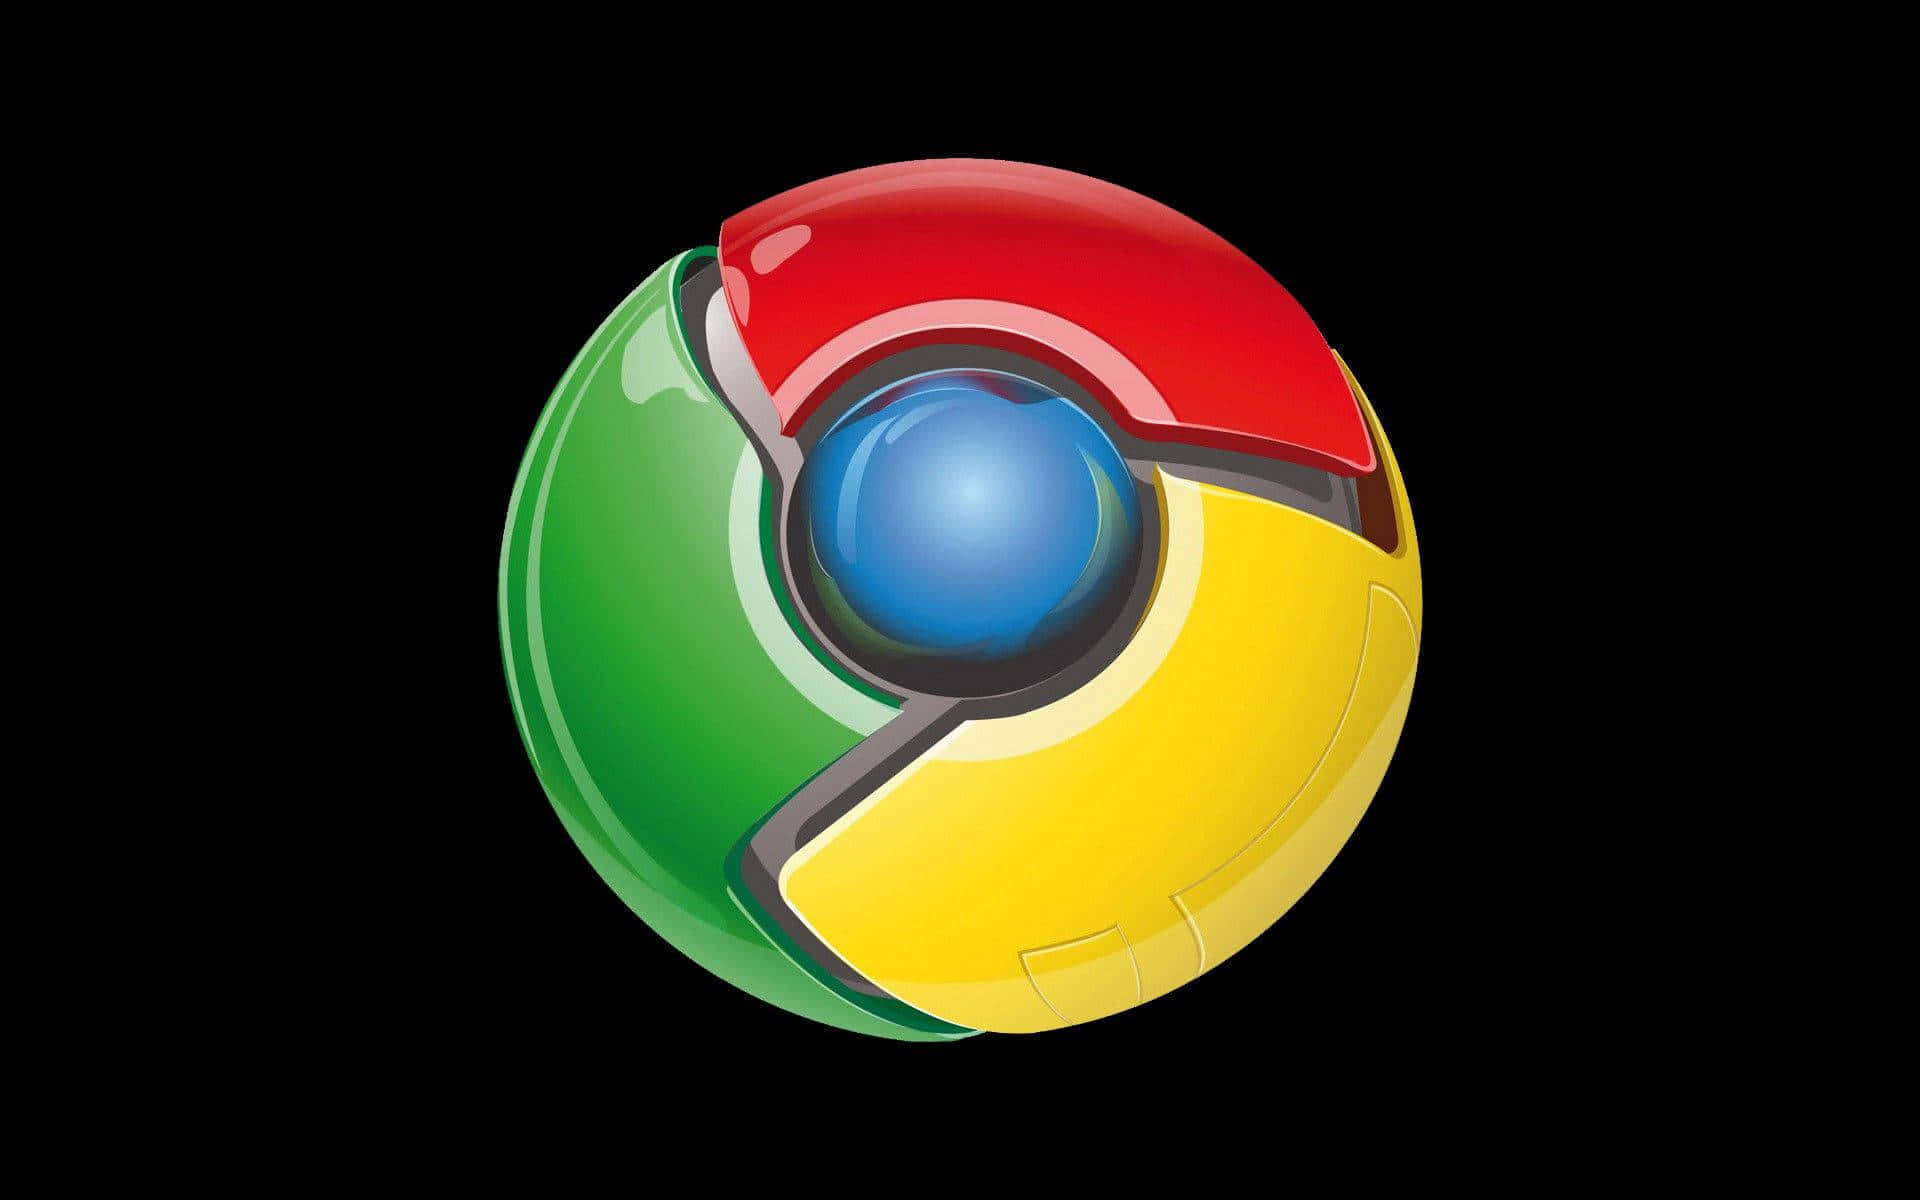 Surfing the web with Chrome